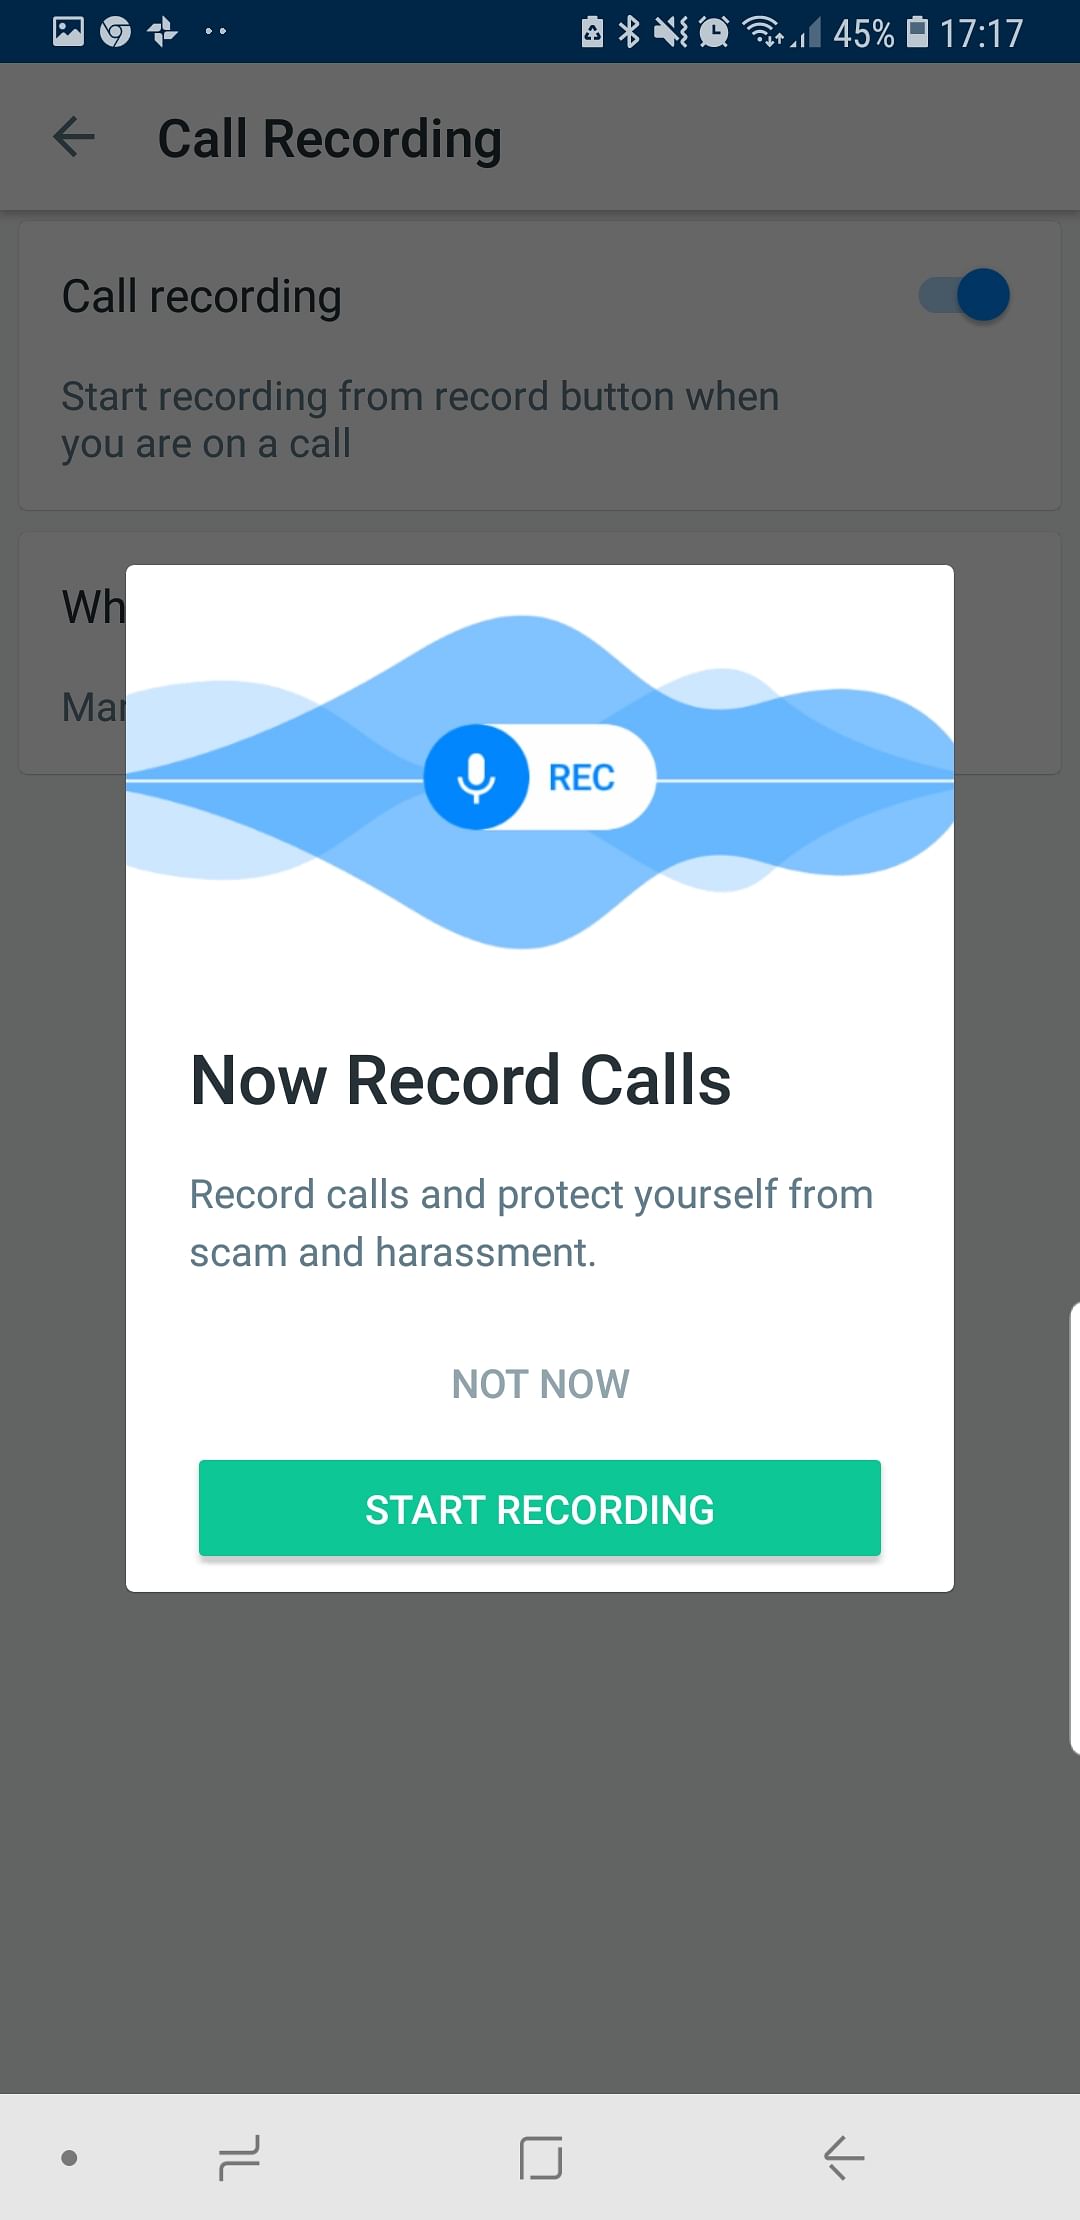 Truecaller has released a new call recording feature for premium users to record phone calls from within the app.